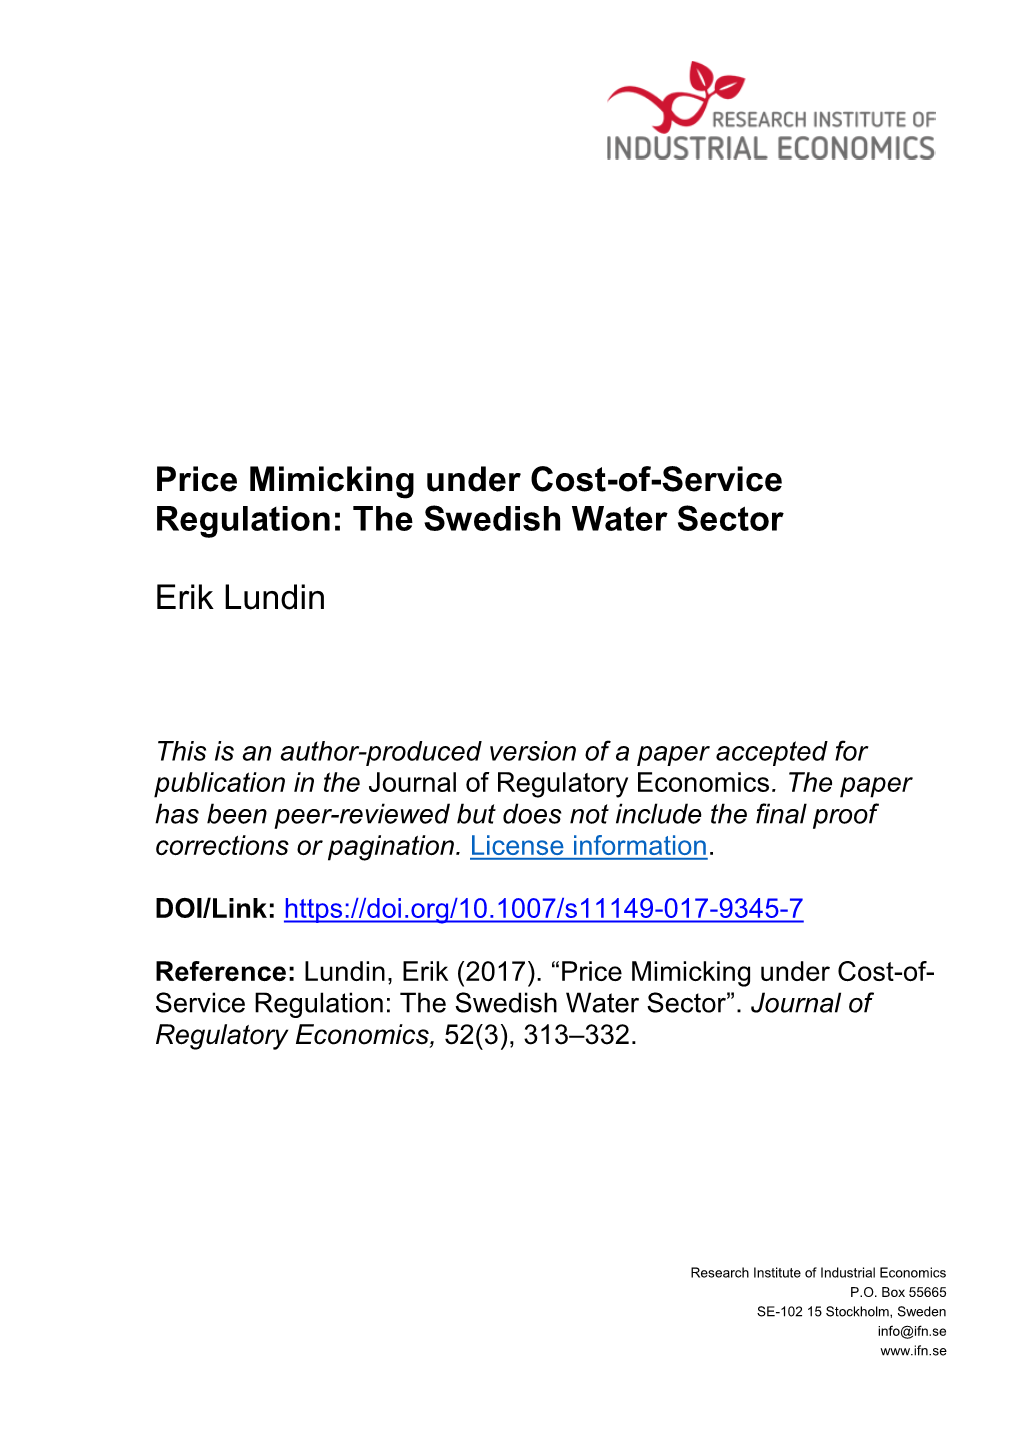 Price Mimicking Under Cost-Of-Service Regulation: the Swedish Water Sector